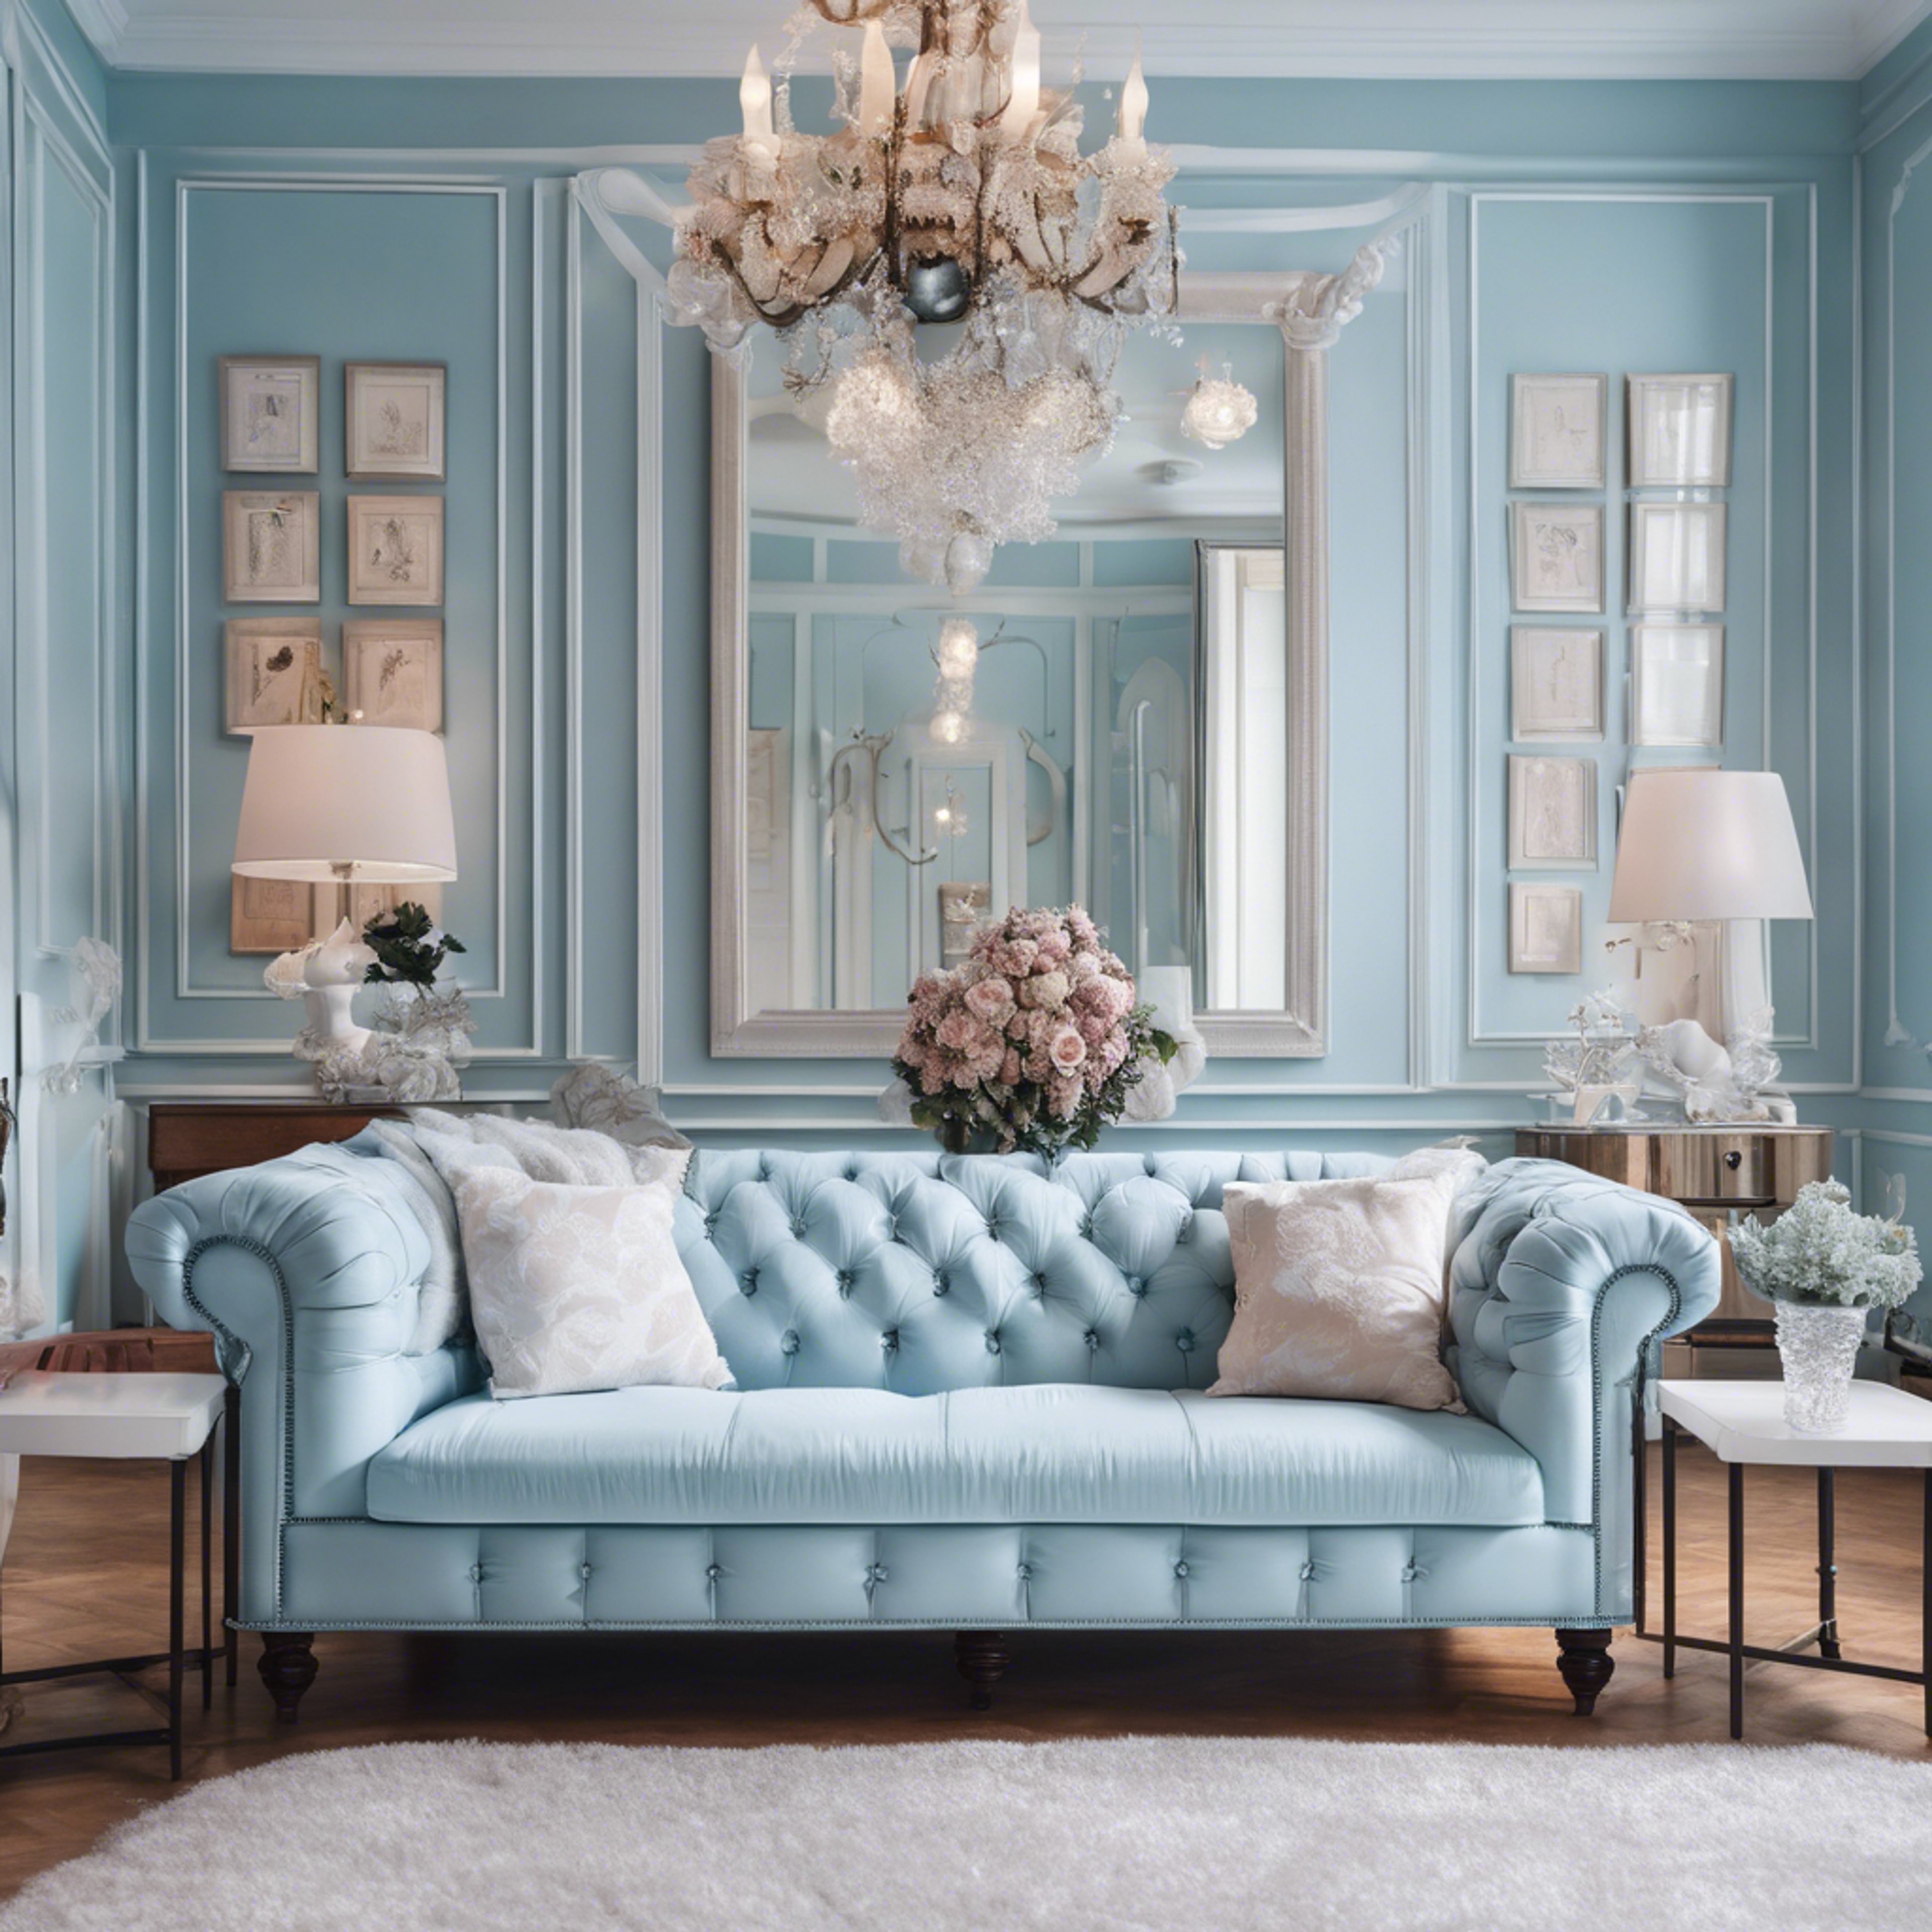 A preppy styled room with pastel blue wallpaper, Chesterfield sofa, and white French style furniture.” Hình nền[3904fac215ba4f1eaa62]